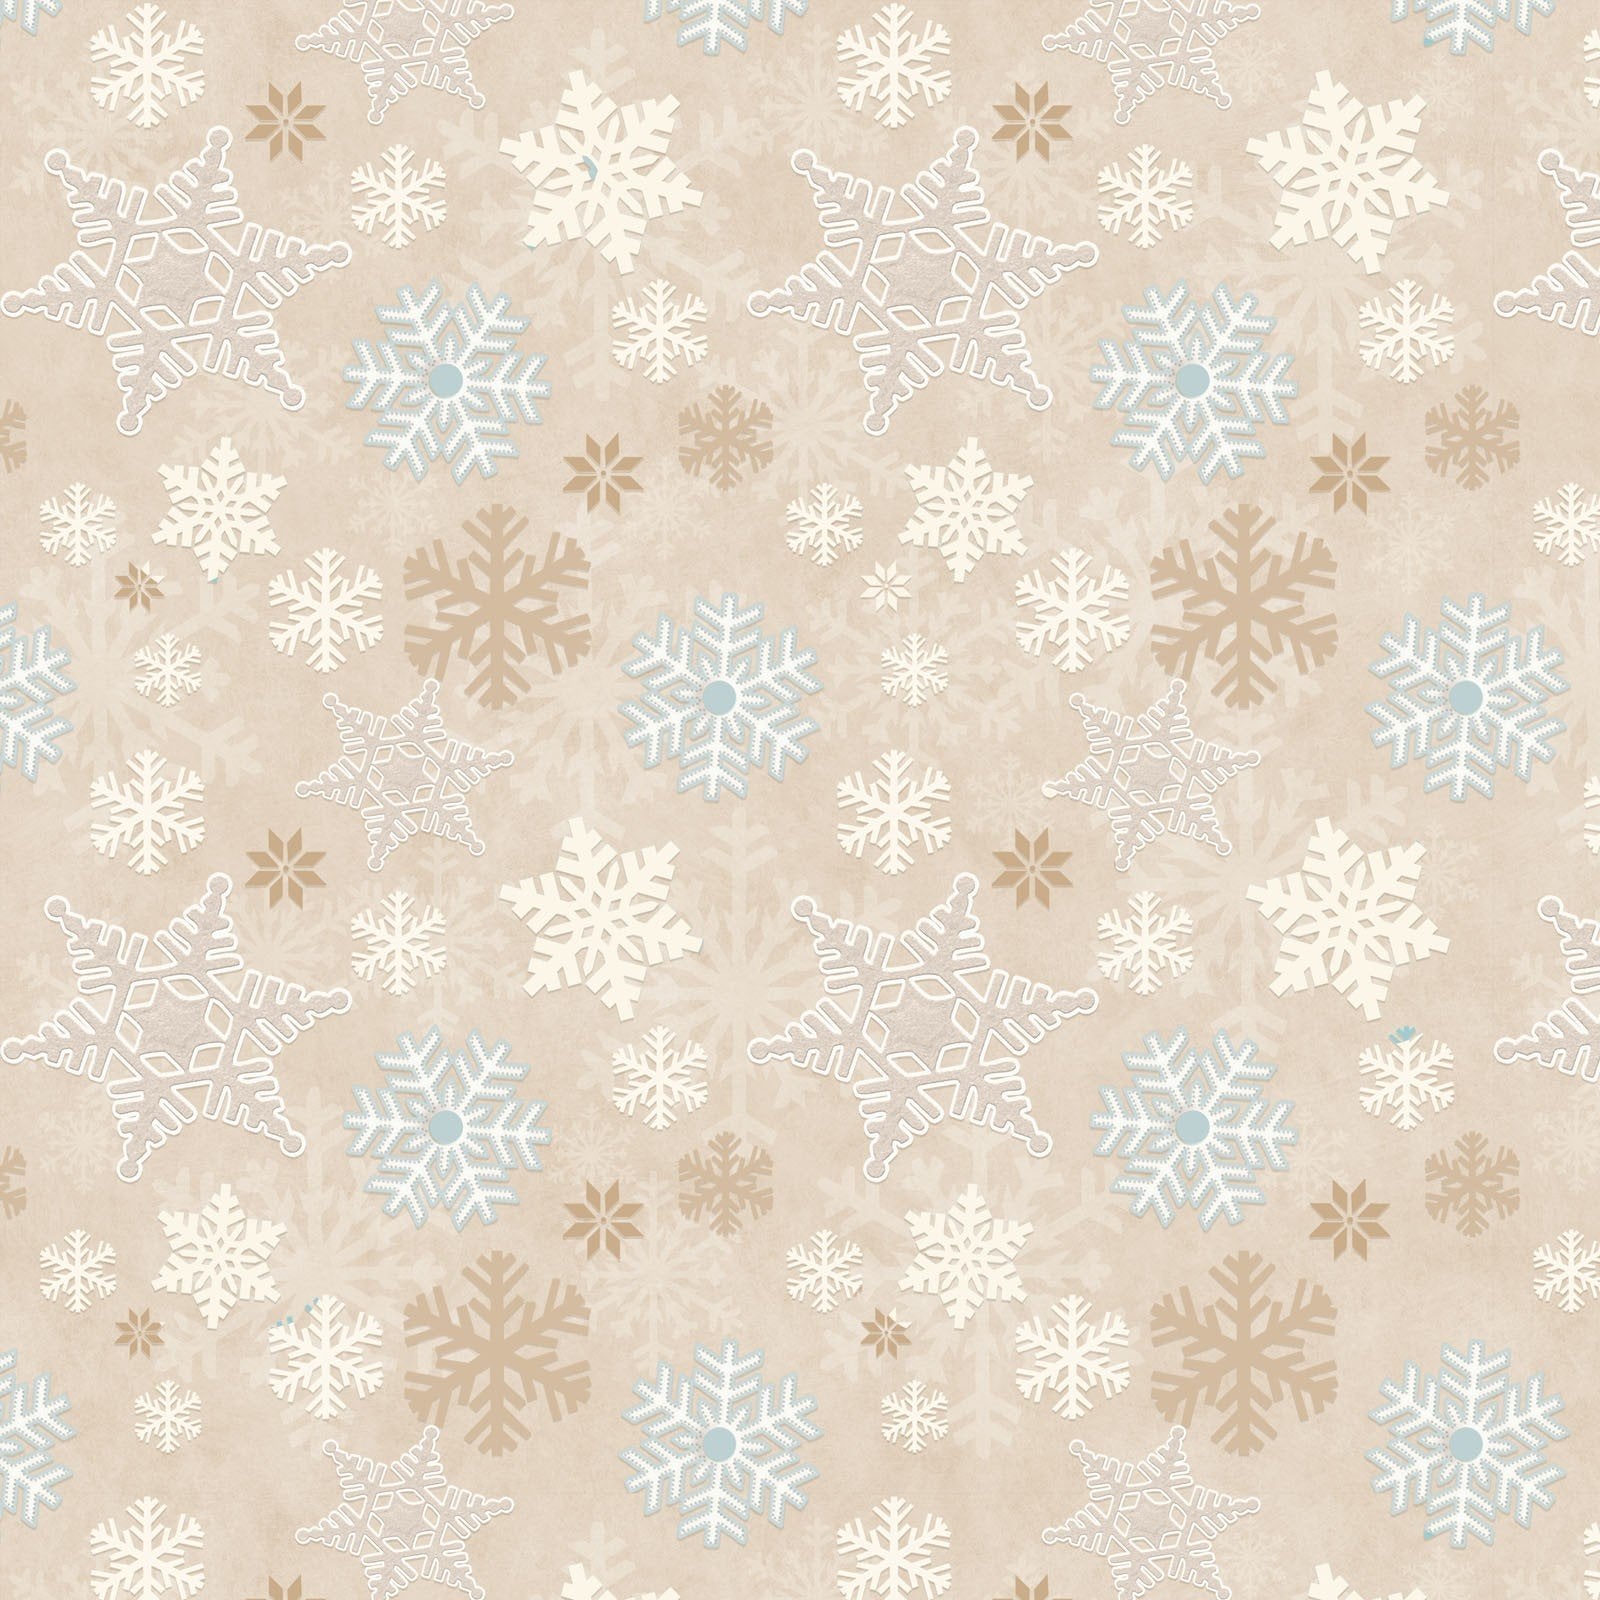 I Love Sn'Gnomies Flannel - Snowflake Allover - Licence To Quilt